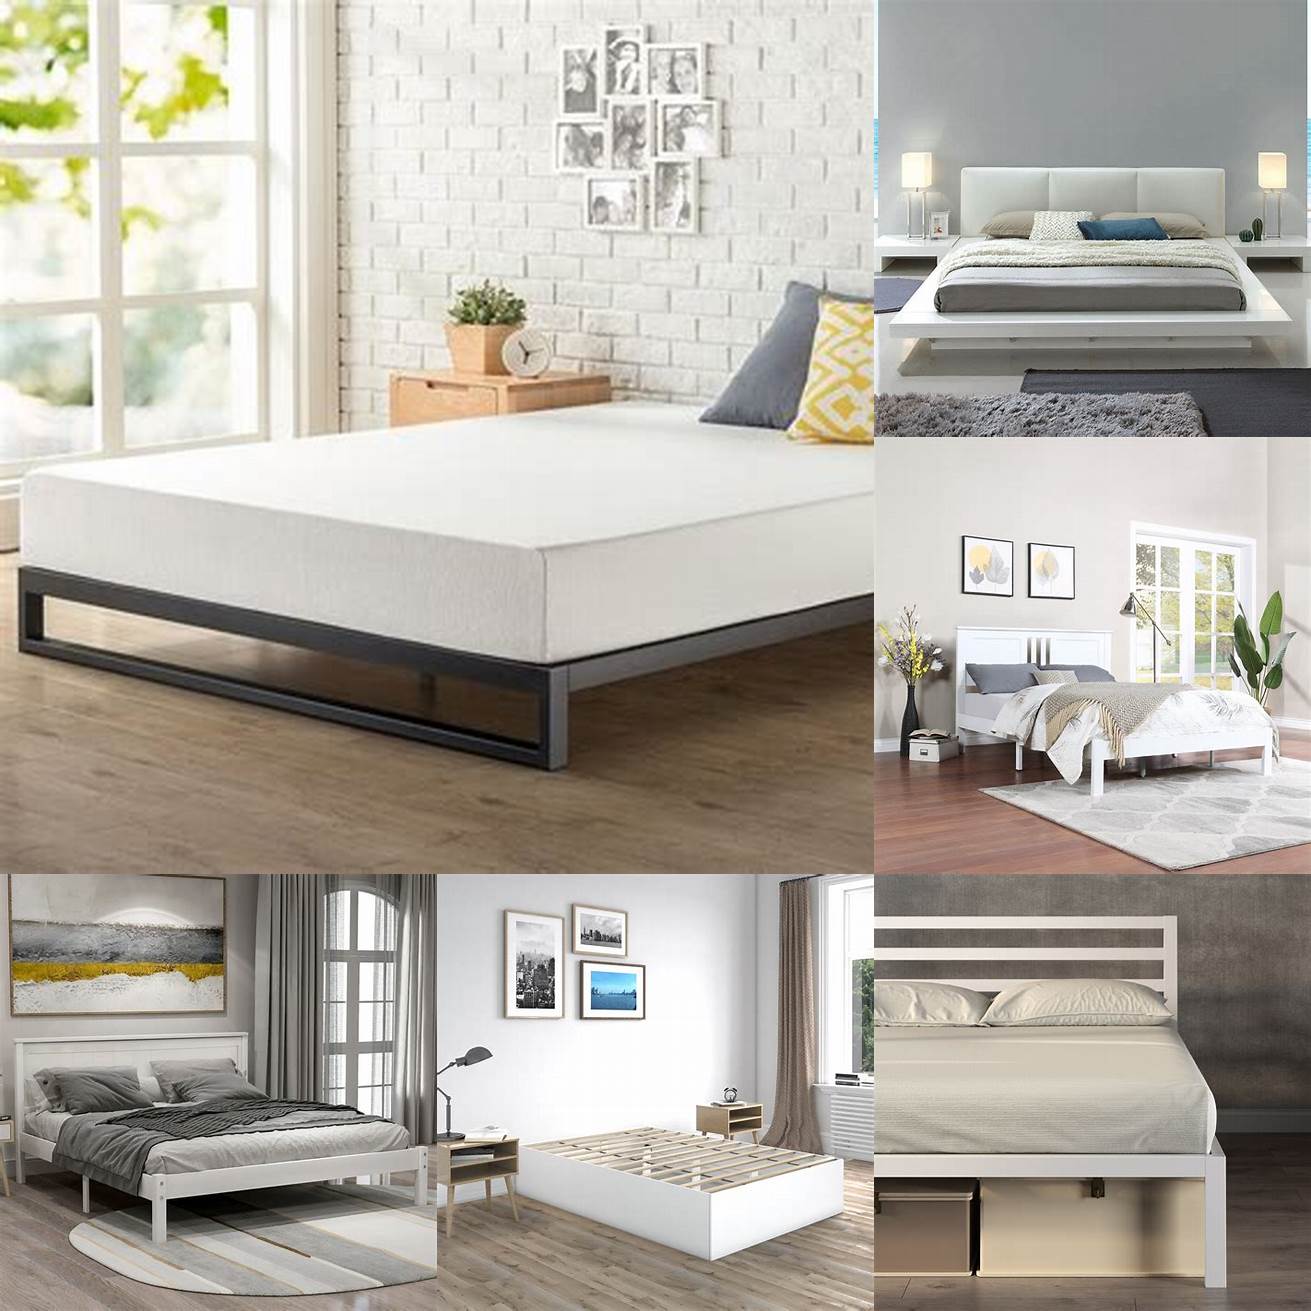 A minimalist queen bed platform with a white finish